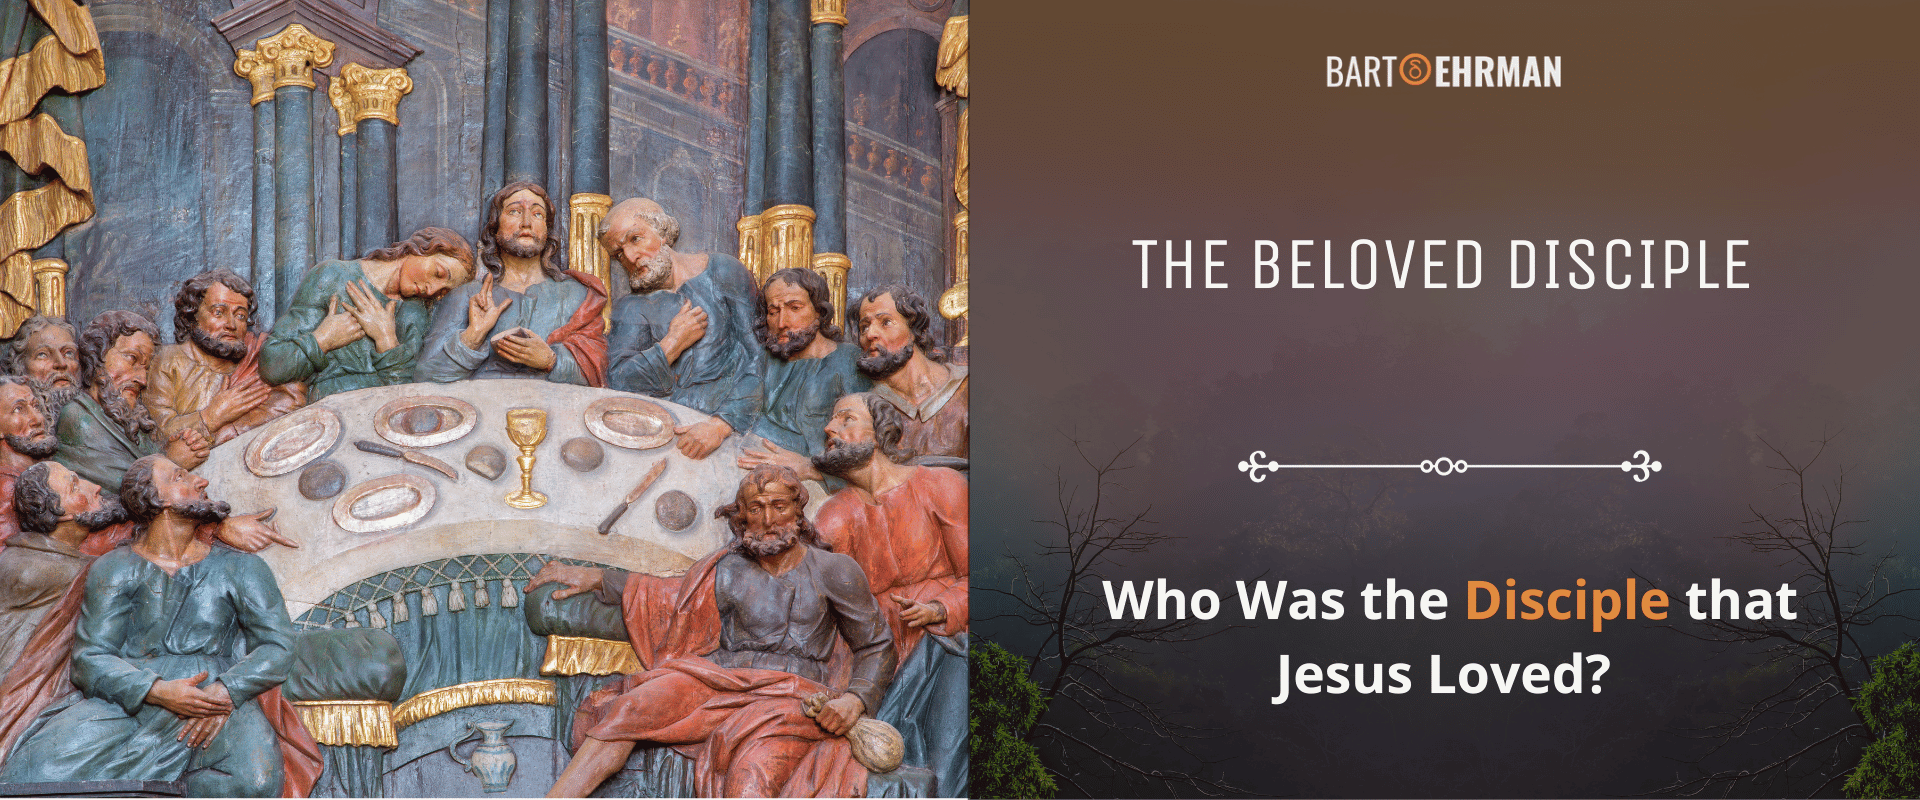 The Beloved Disciple - Who Is the Disciple that Jesus Loved